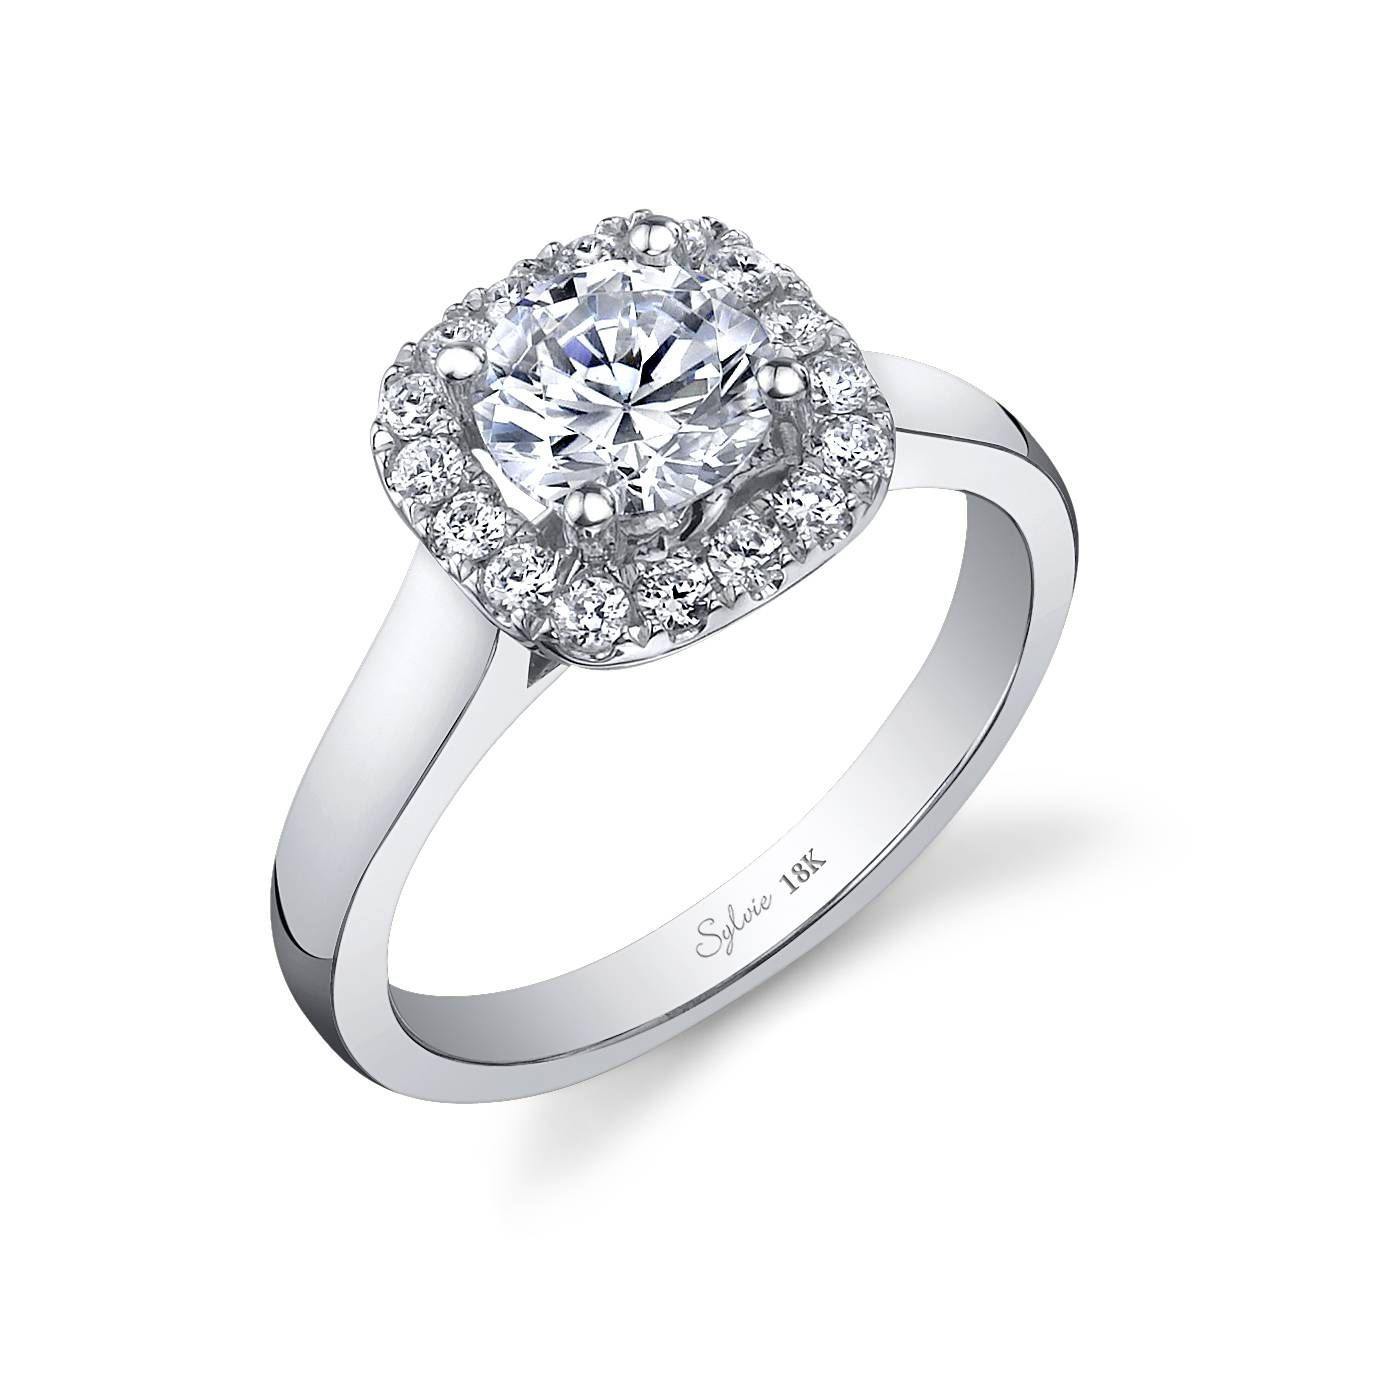 Halo Set Diamond Engagement Ring: Sylvie Collectionalexis Diamond Pertaining To Wedding Rings Settings Without Center Stone (View 7 of 15)